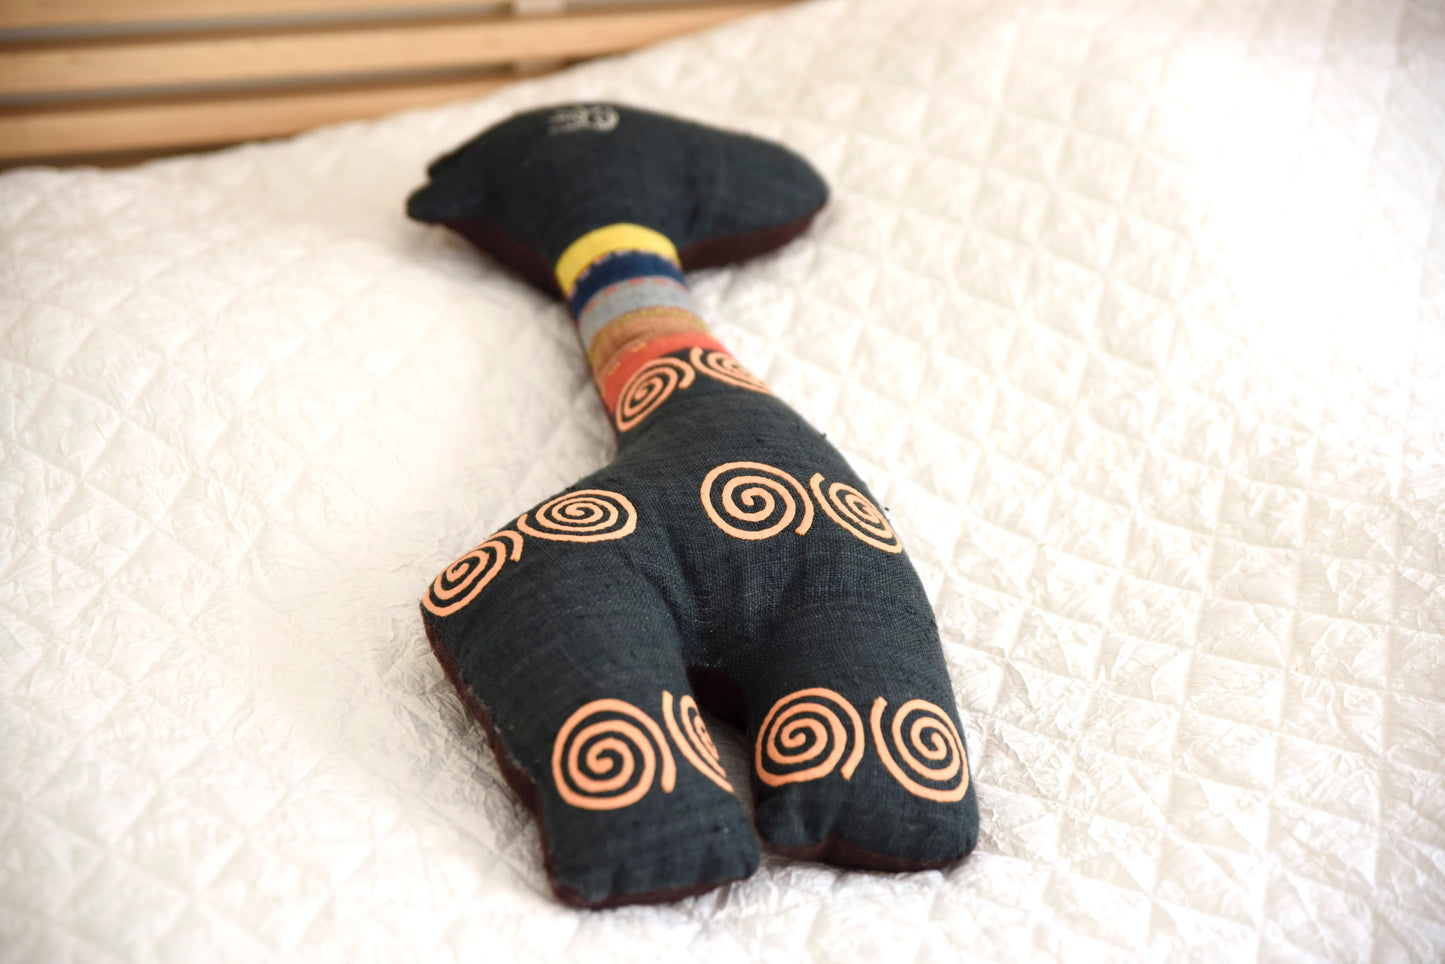 Unique blue cuddly deer stuffed animal, dark indigo blue, natural colored, hand-made from H'mong tribal fabrics